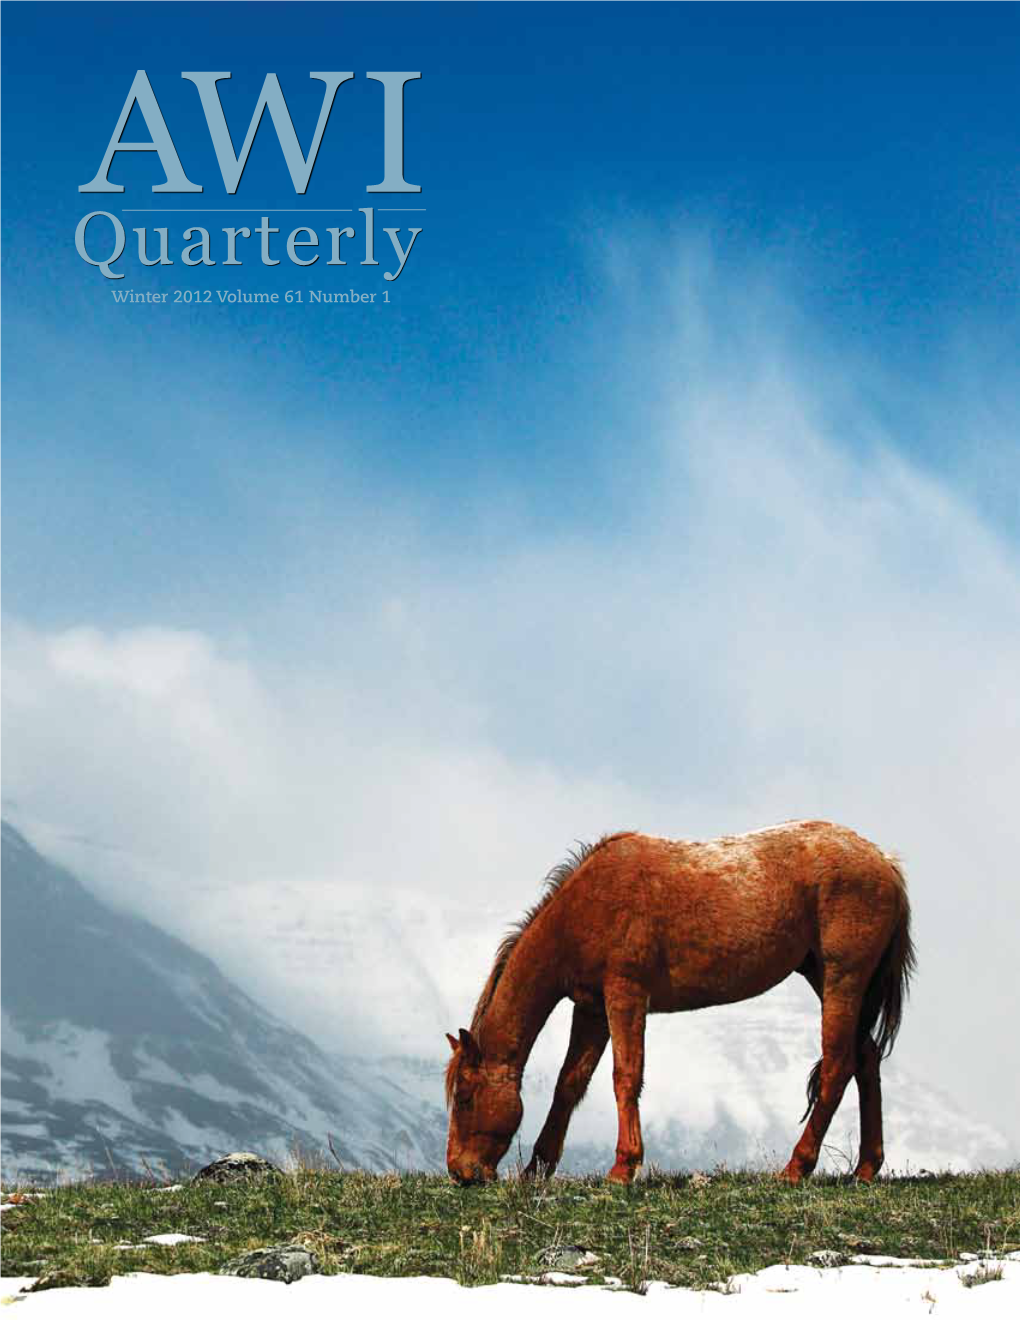 Quarterly Winter 2012 Volume 61 Number 1 AWI Quarterly ABOUT the COVER Founder a Wild Horse Grazes Near Glacier National Park in Montana